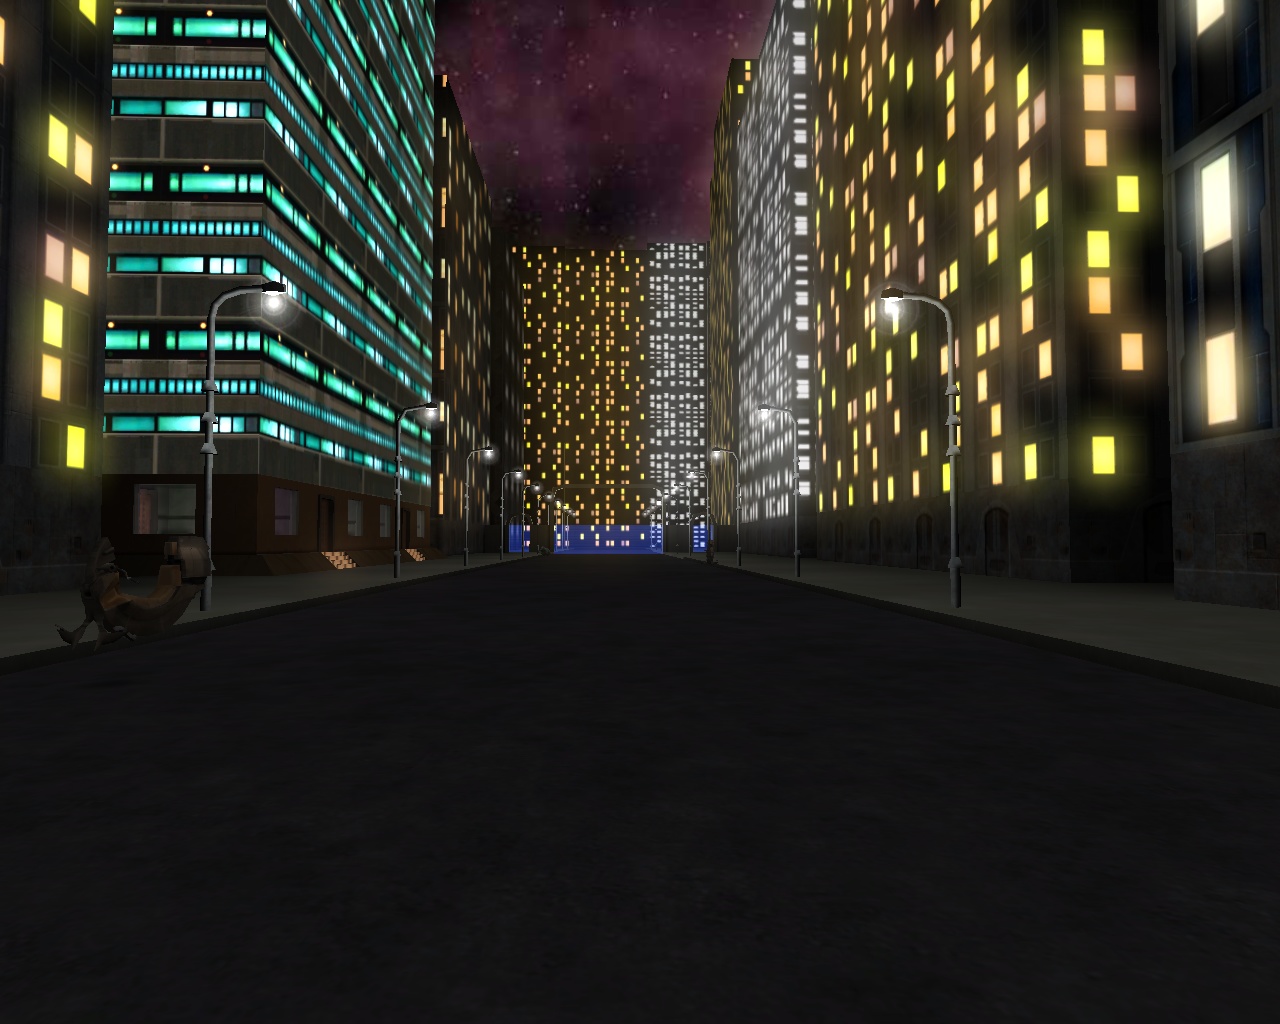 More information about "The City Crossroads - Night Version"